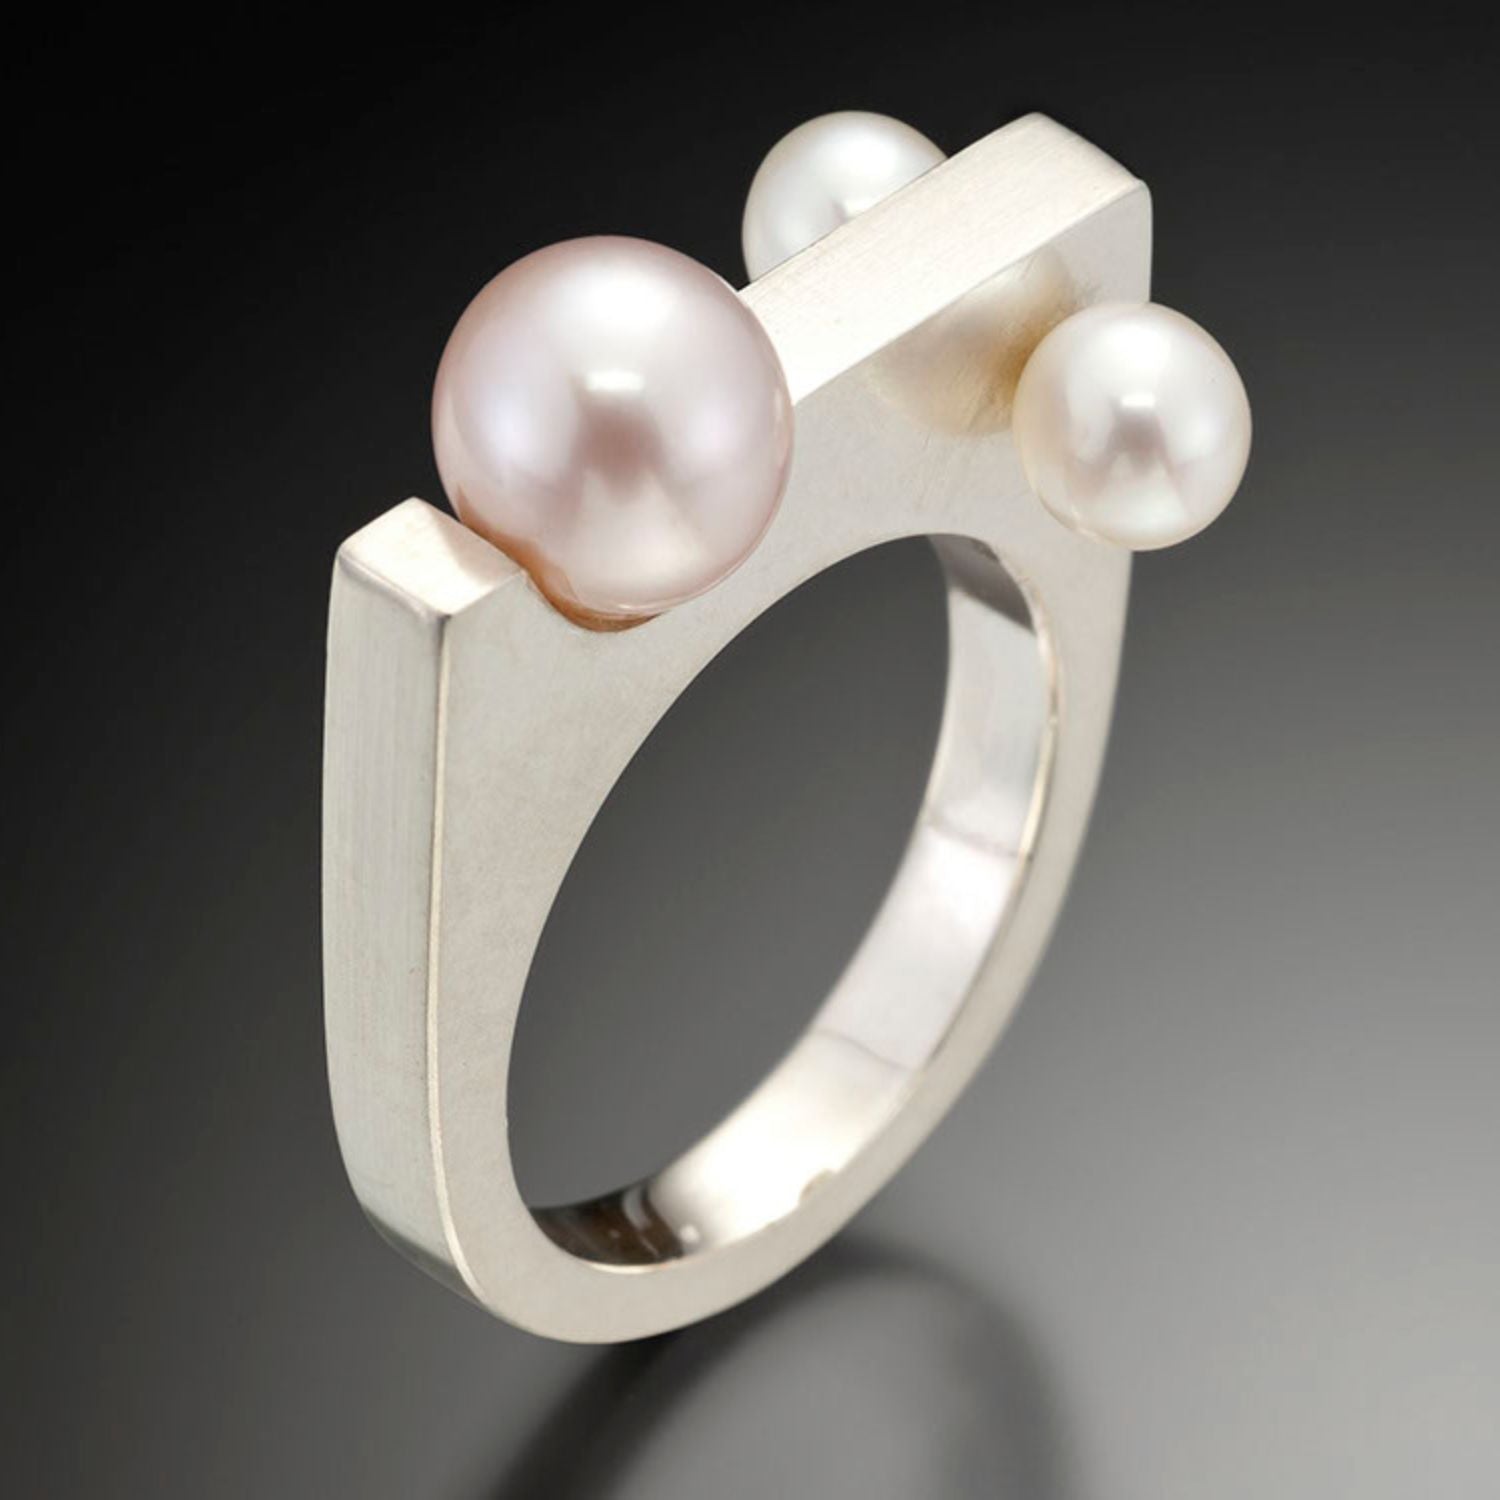 High-quality materials and artisanal craftsmanship, the cornerstones of Estelle Vernon's jewelry.